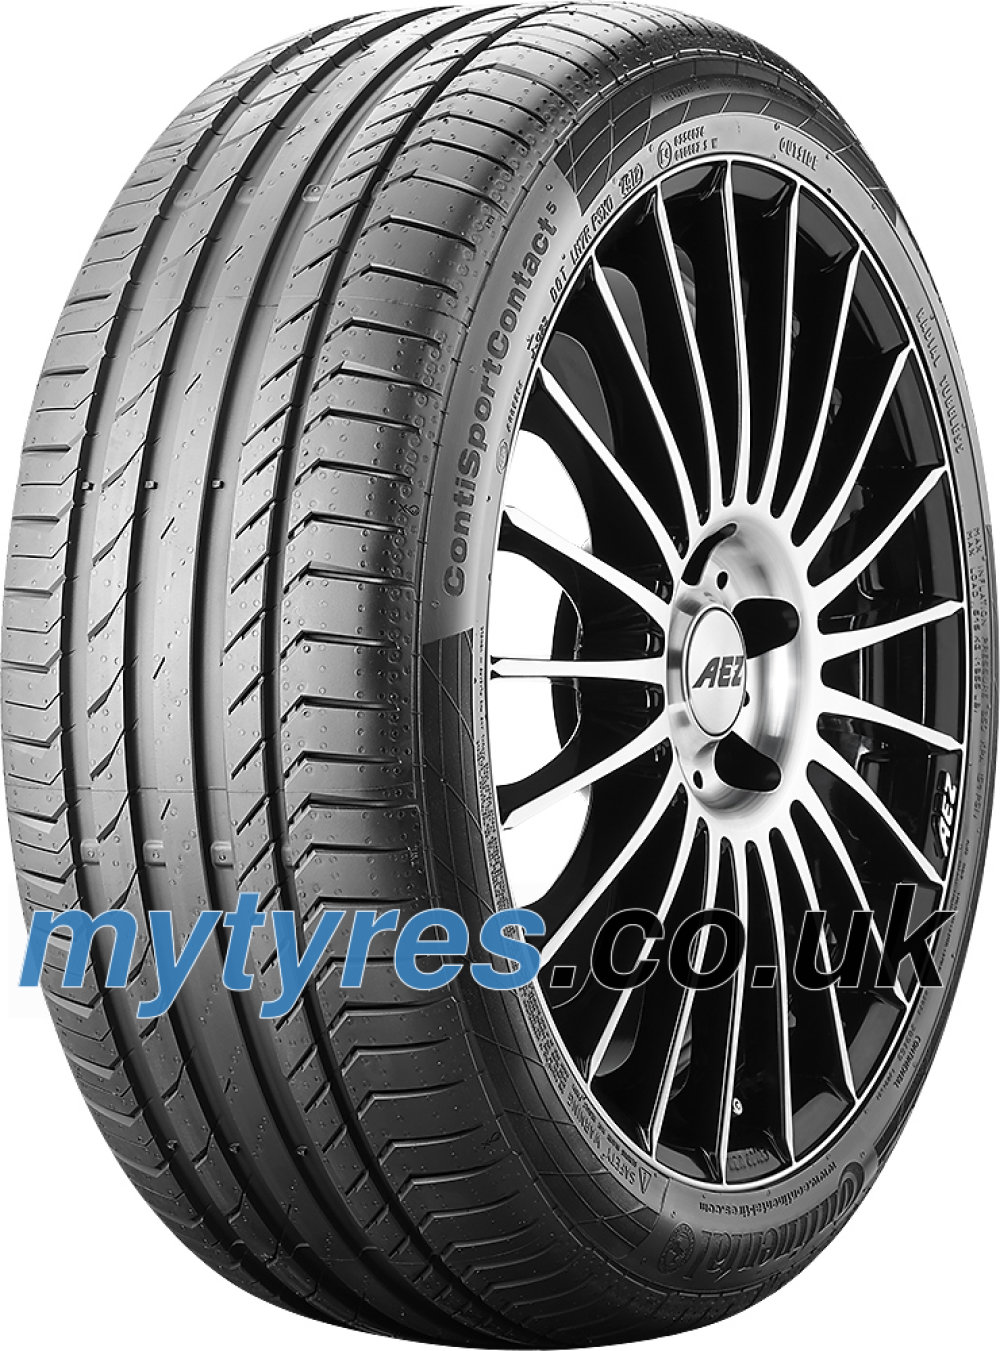 Continental ContiSportContact 5 SSR 225/50 R17 94W *, runflat @  mytyres.co.uk